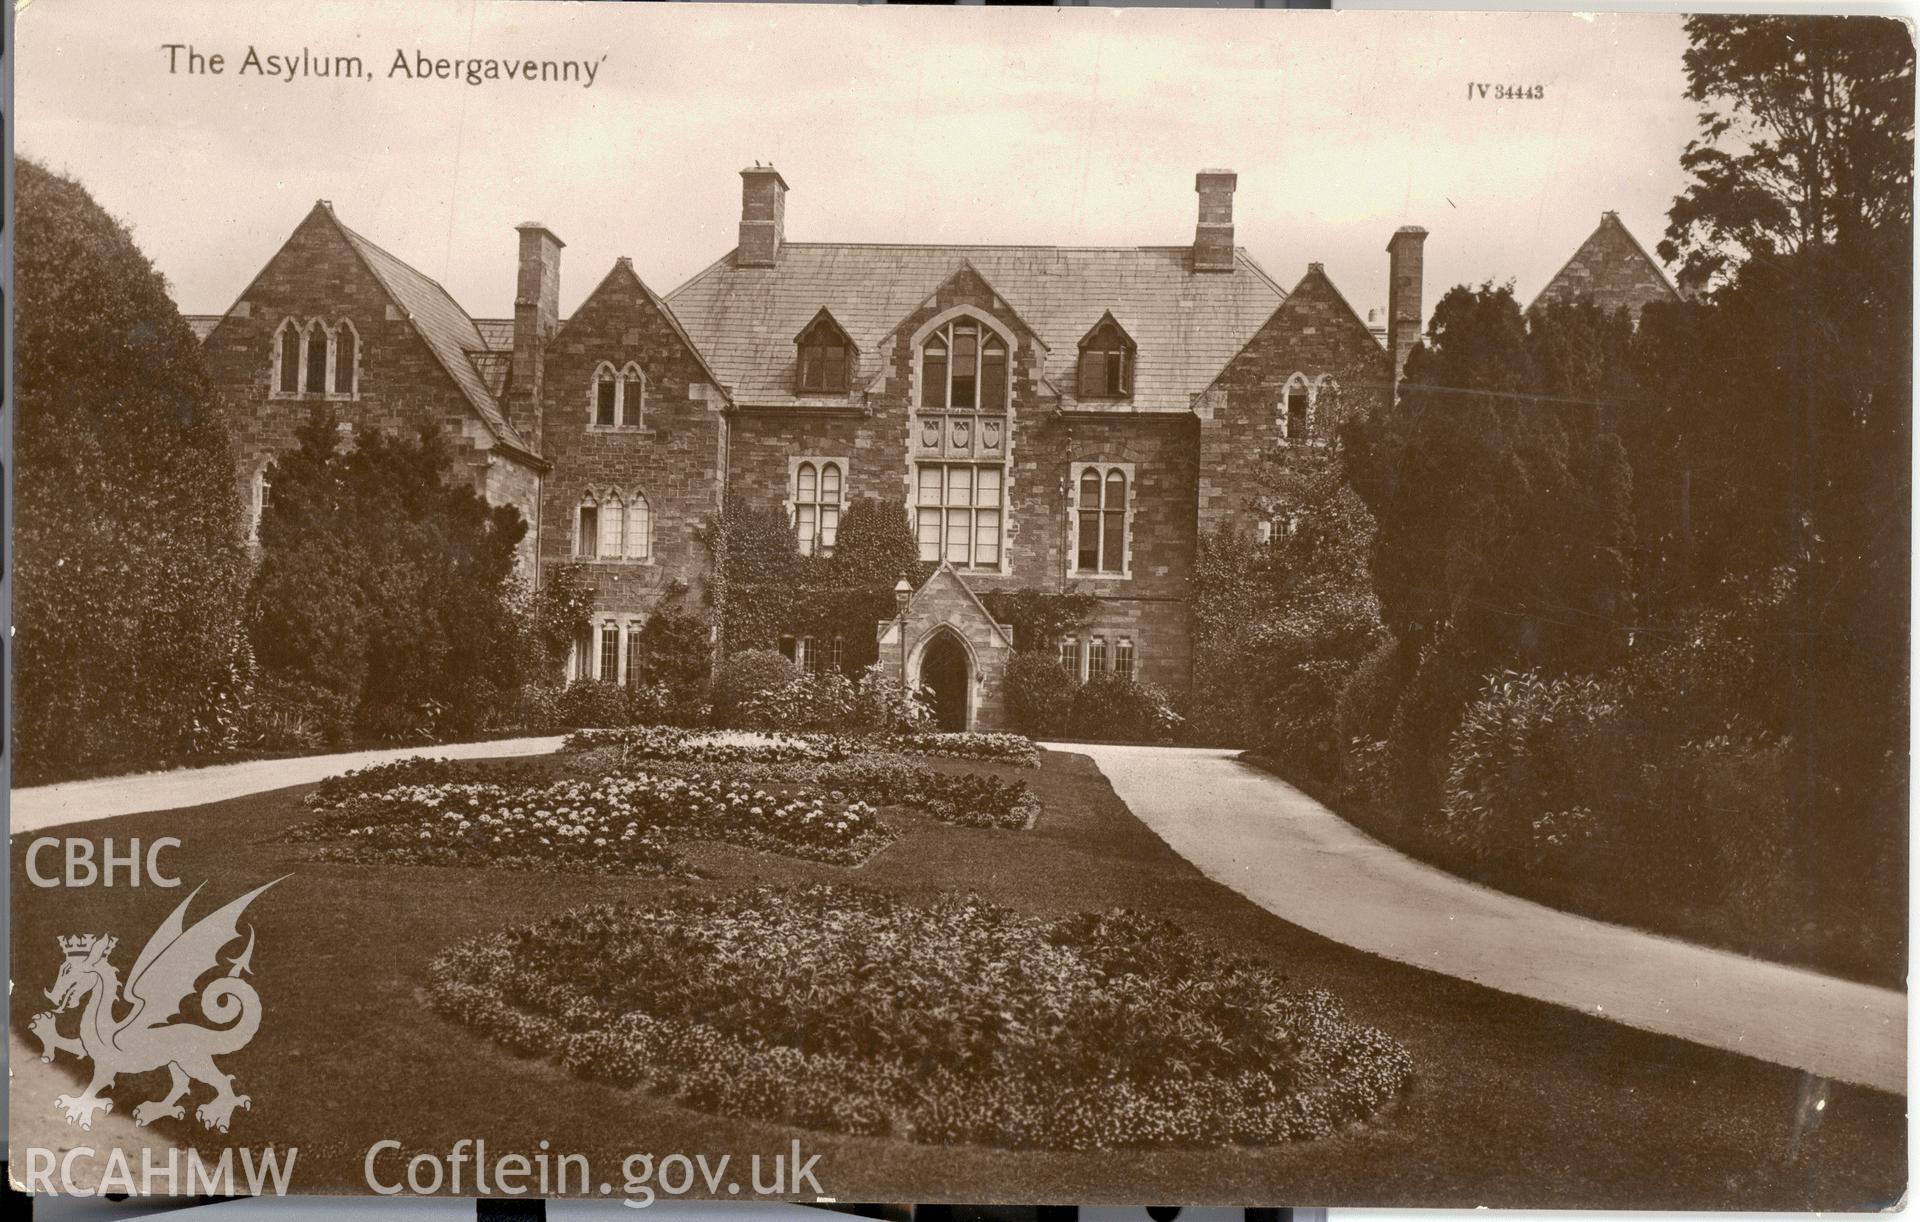 Digitised postcard image of Abergavenny Asylum. Produced by Parks and Gardens Data Services, from an original item in the Peter Davis Collection at Parks and Gardens UK. We hold only web-resolution images of this collection, suitable for viewing on screen and for research purposes only. We do not hold the original images, or publication quality scans.